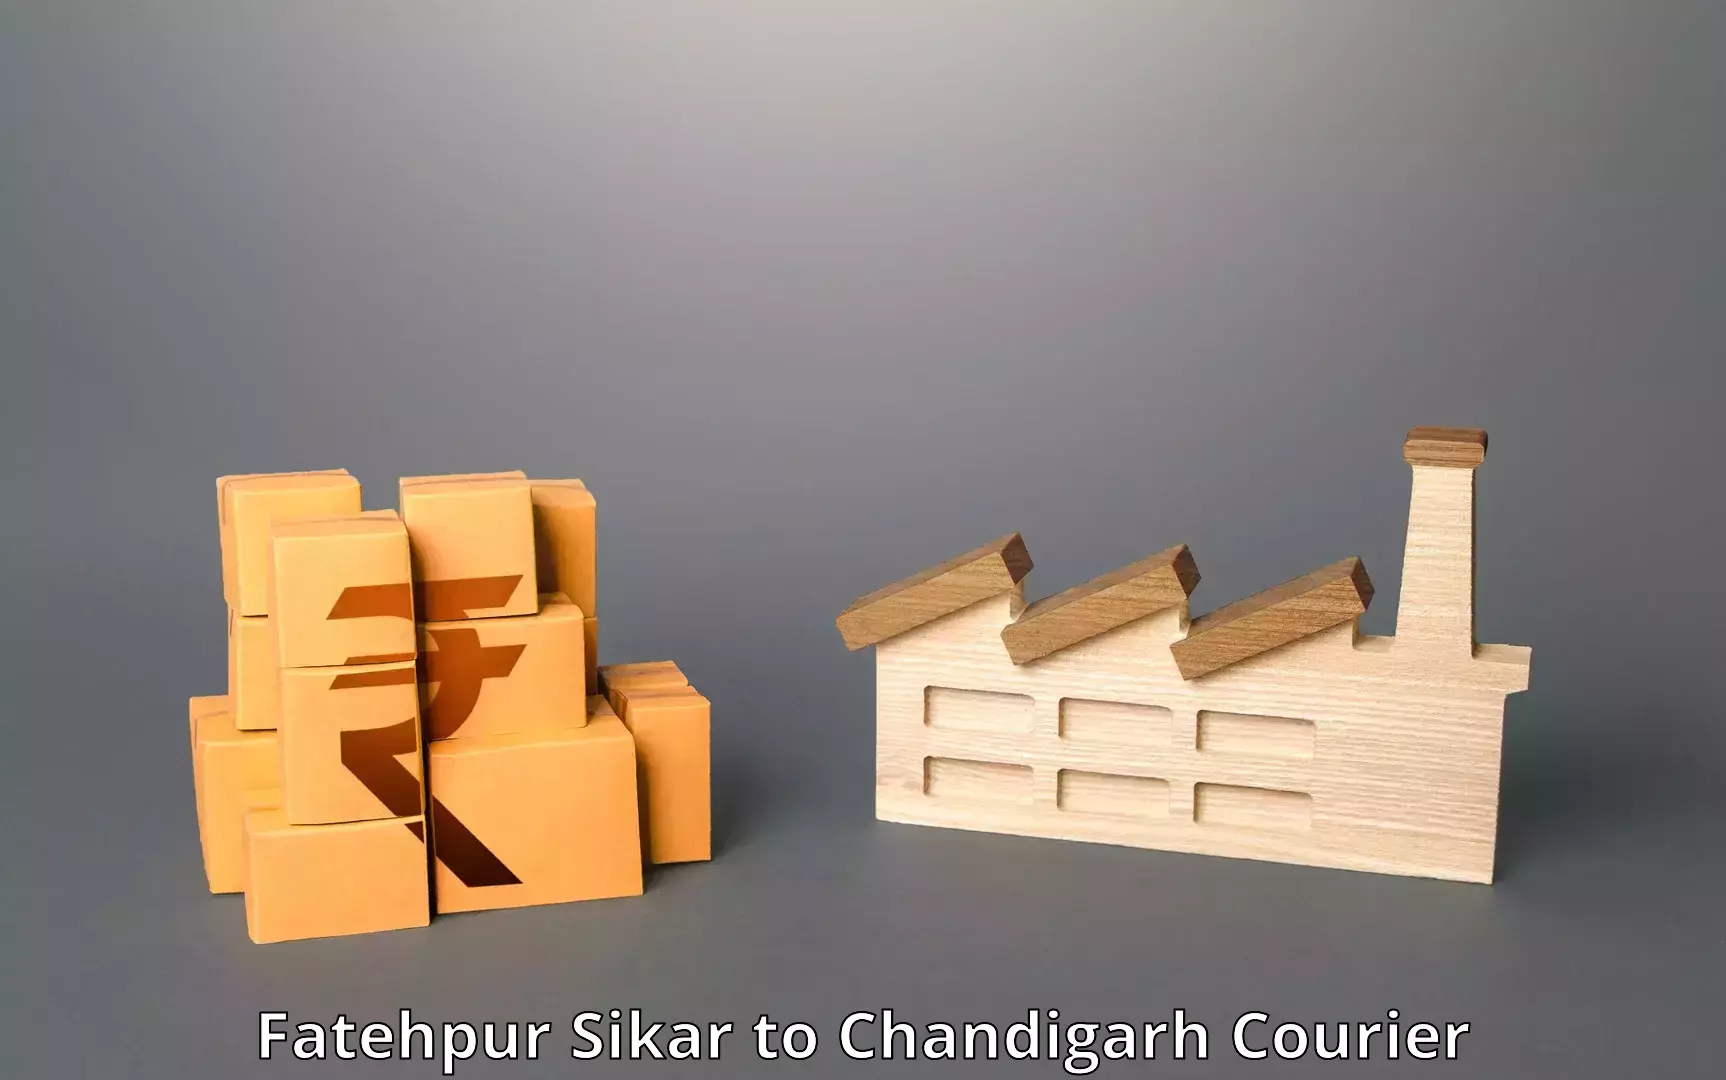 Global shipping networks Fatehpur Sikar to Chandigarh